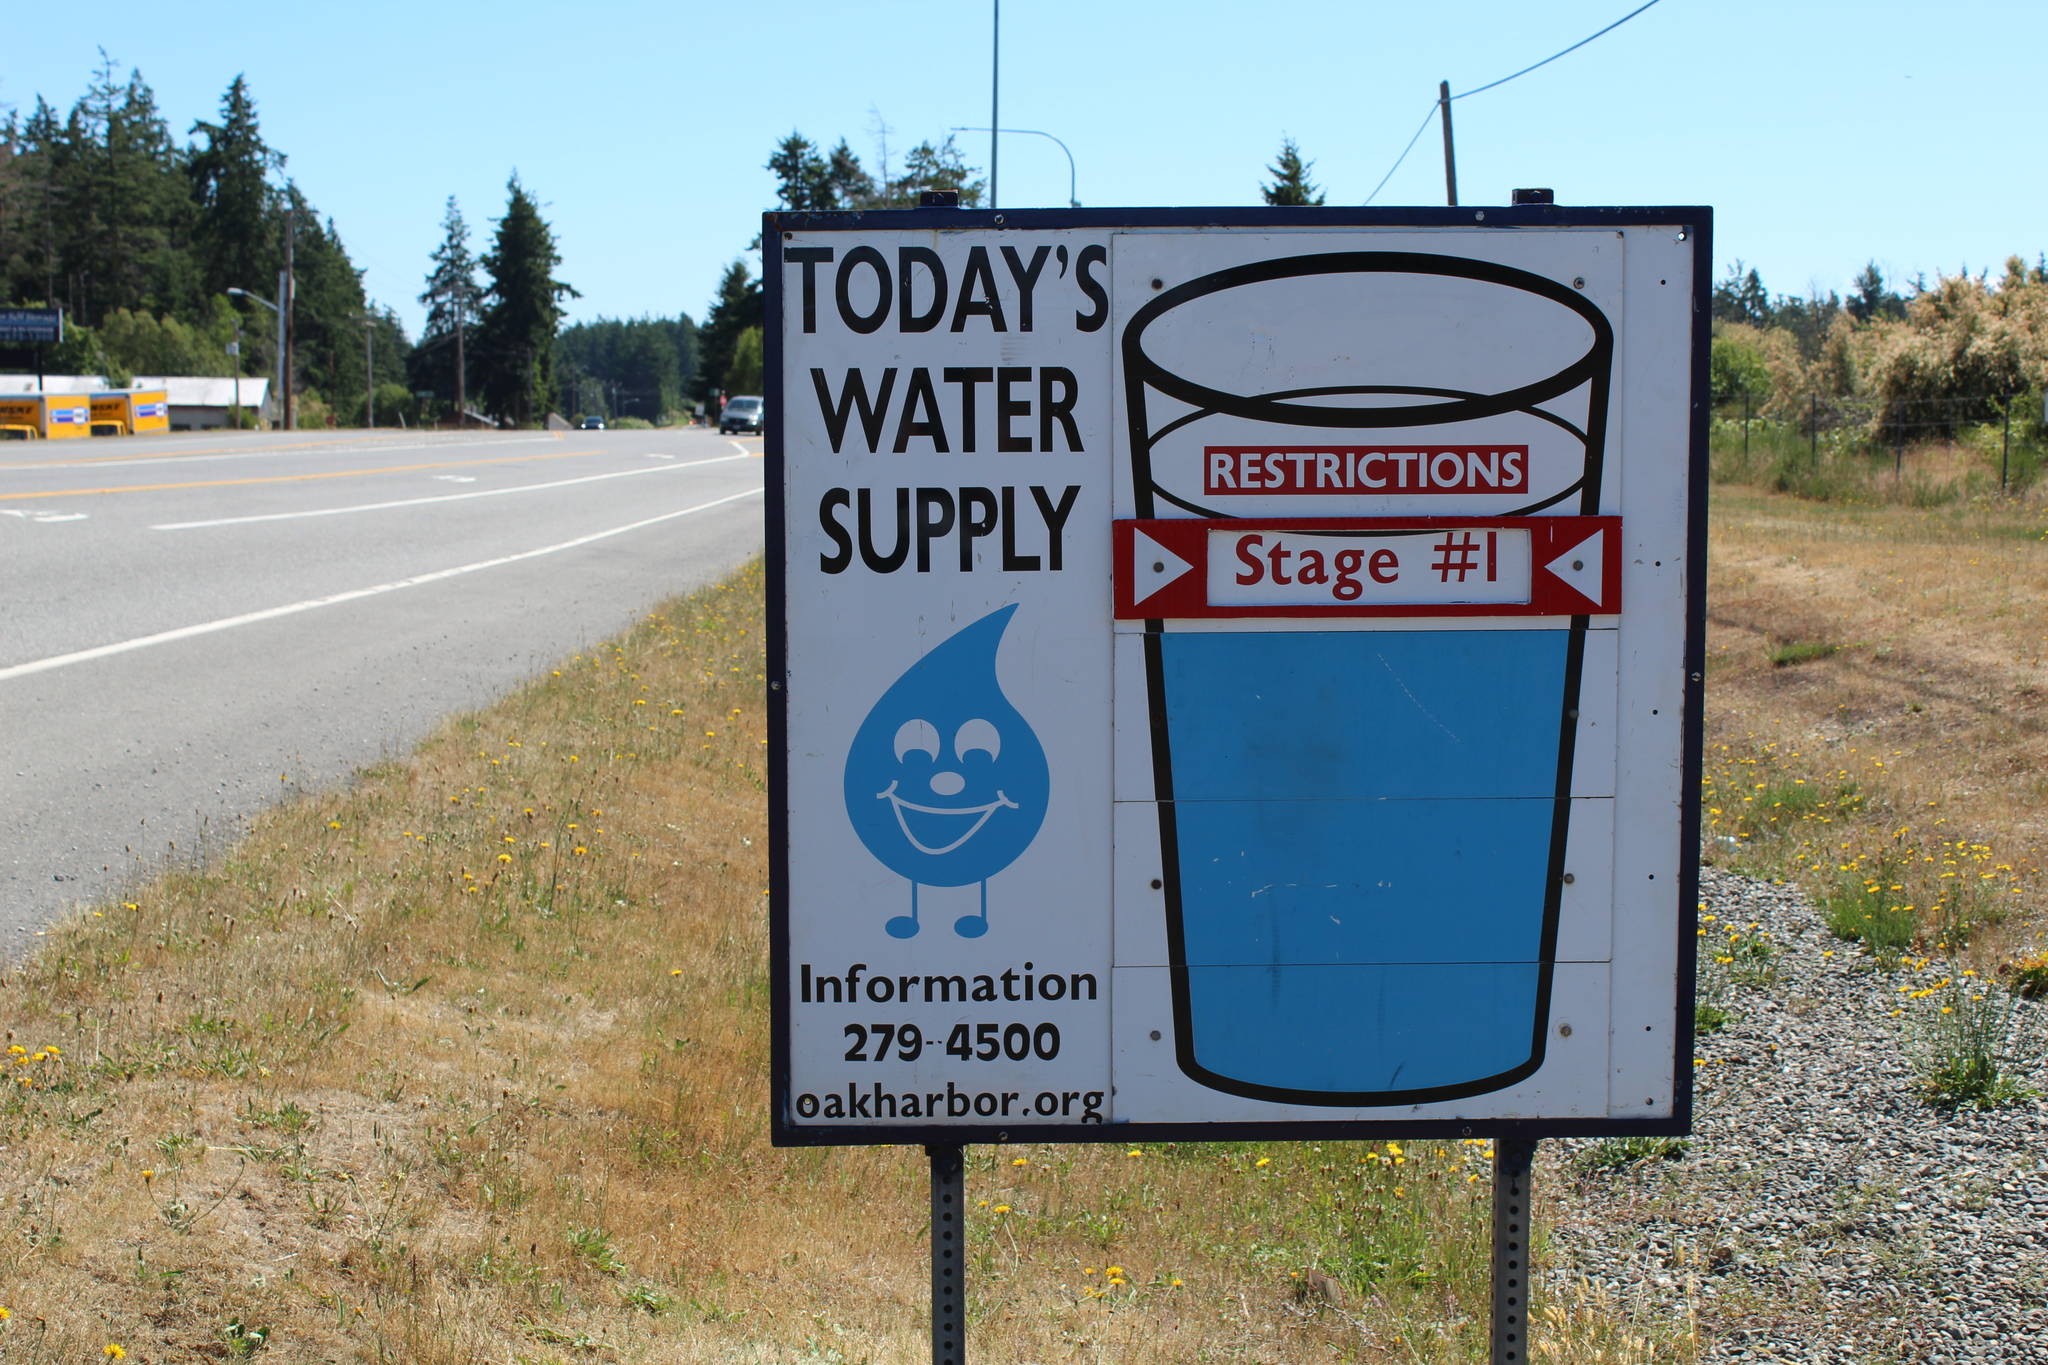 Photo by Karina Andrew/Whidbey News-Times
Oak Harbor was in Stage 1 of water restrictions as of Monday afternoon which calls for voluntary water reduction after a regional chlorine shortage has threatened the city of Anacortes’s water treatment capabilities. There are three stages of water restrictions.